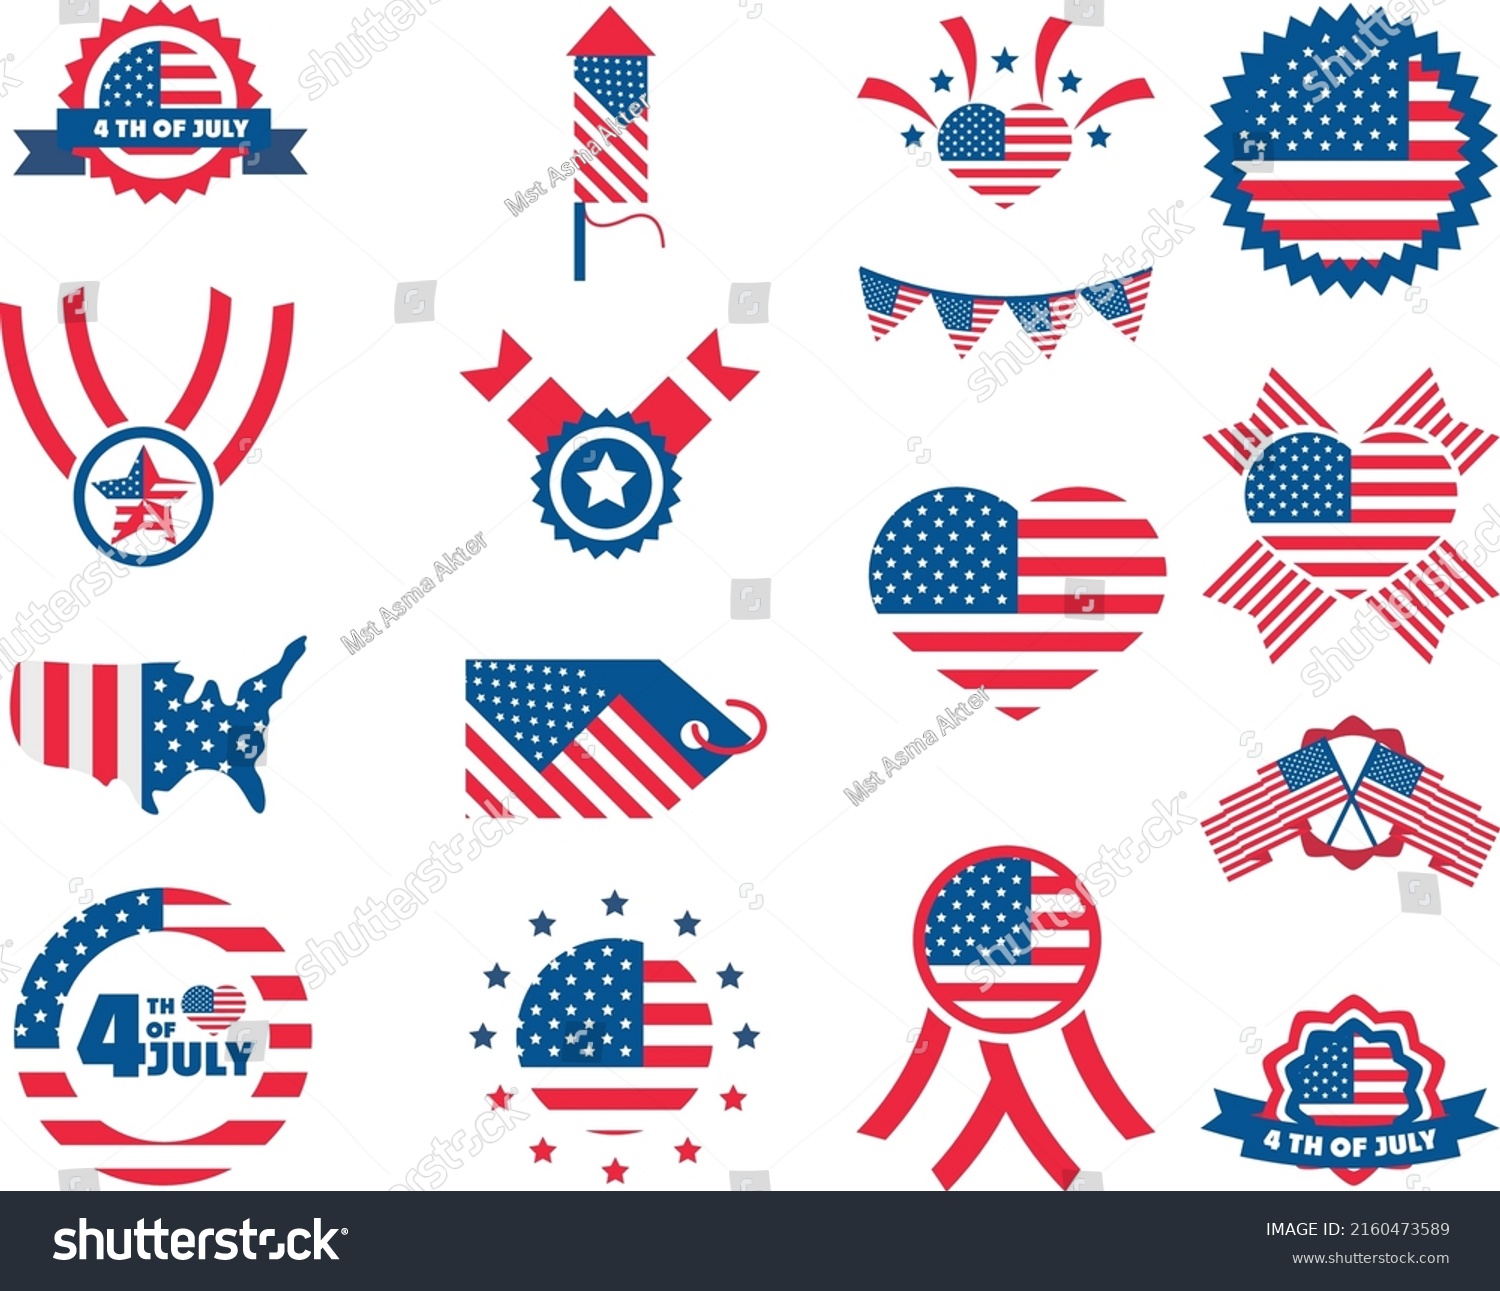 SVG of 
4th of July independence day celebration honor memorial American flag icons set block and flat style icon svg